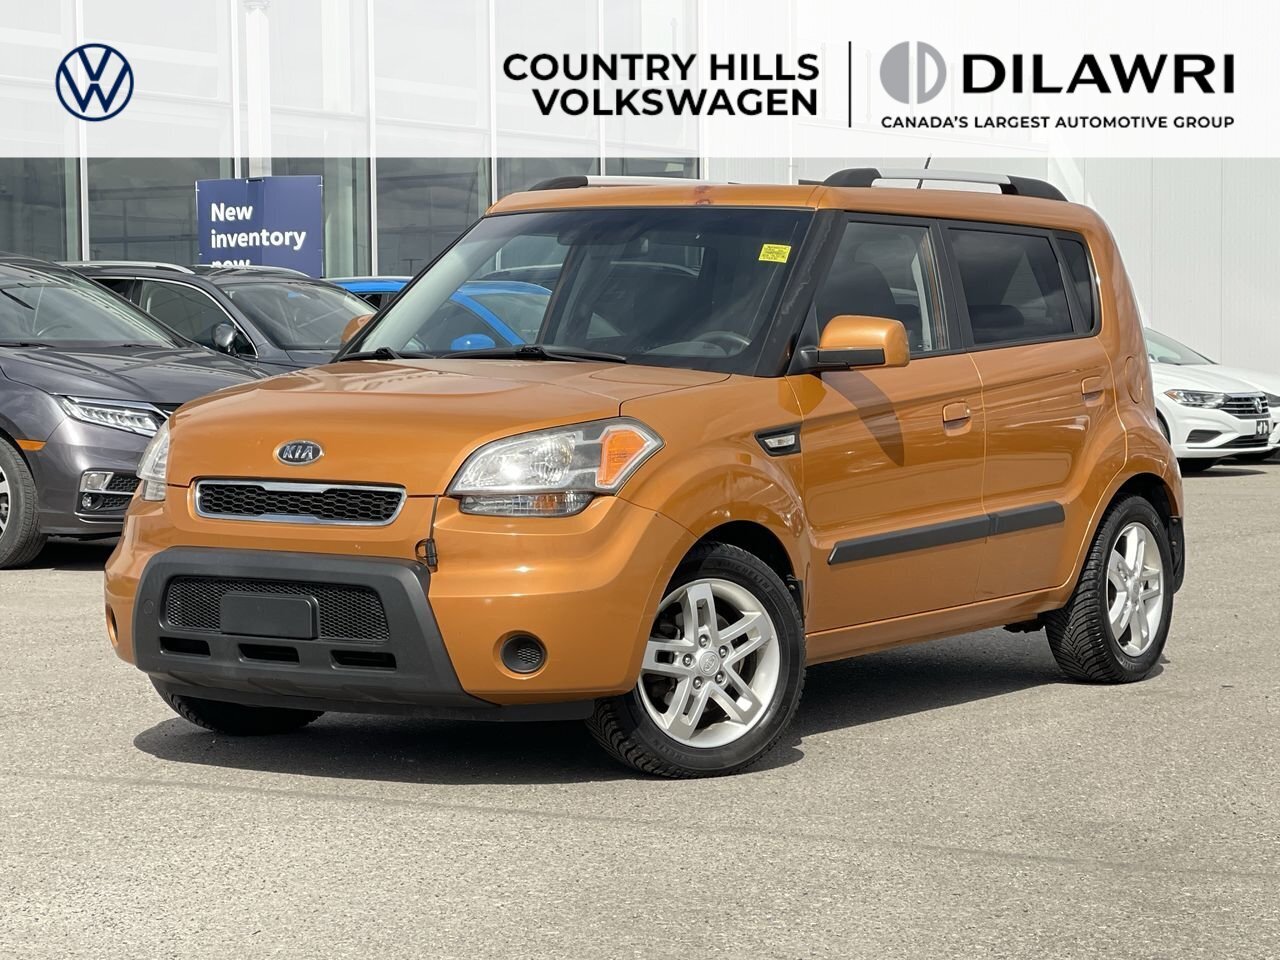 2010 Kia Soul 1.6L 5sp Locally Owned/One Owner/Accident Free / 